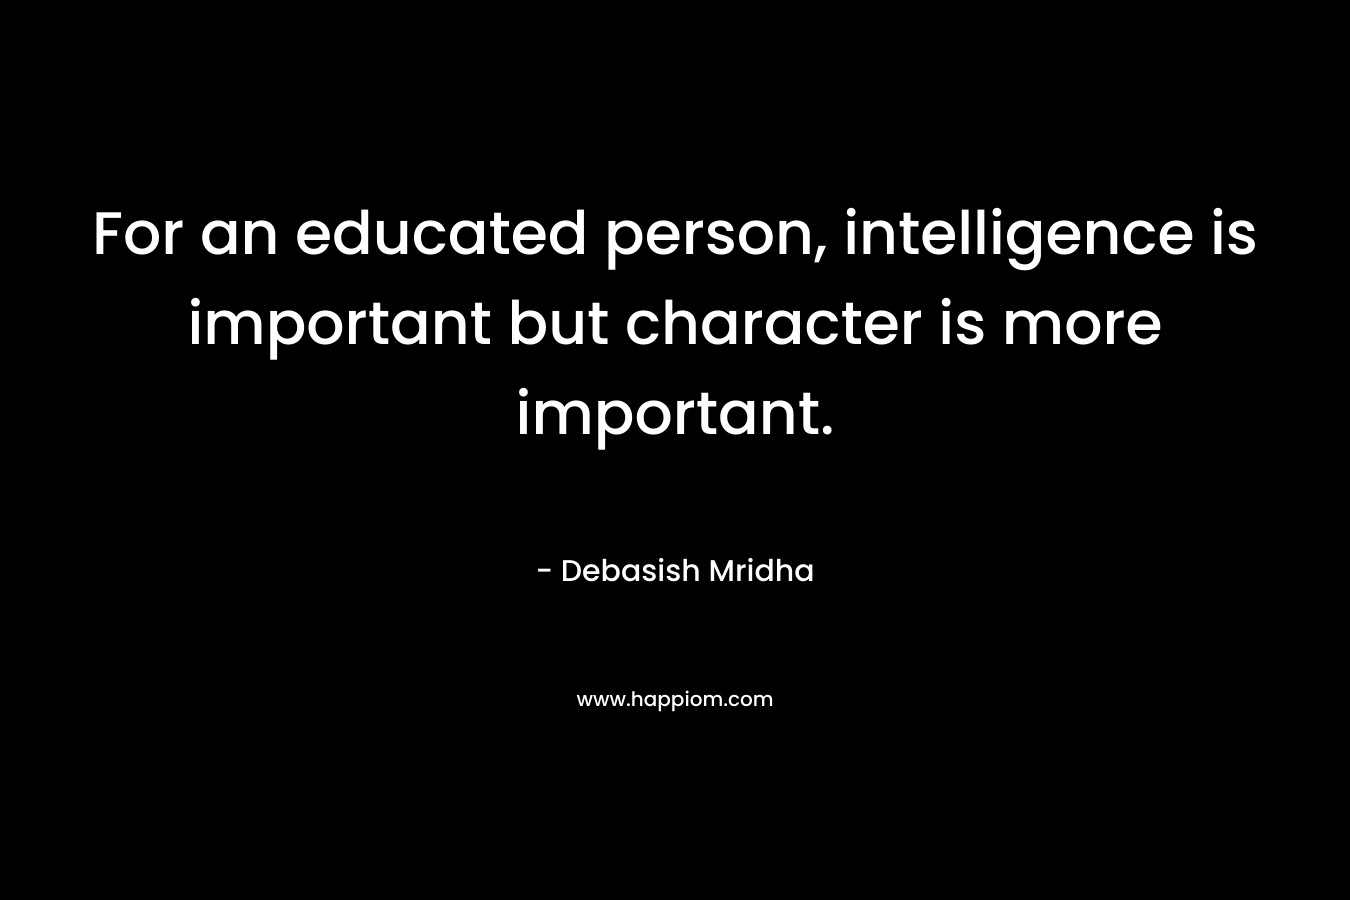 For an educated person, intelligence is important but character is more important. – Debasish Mridha